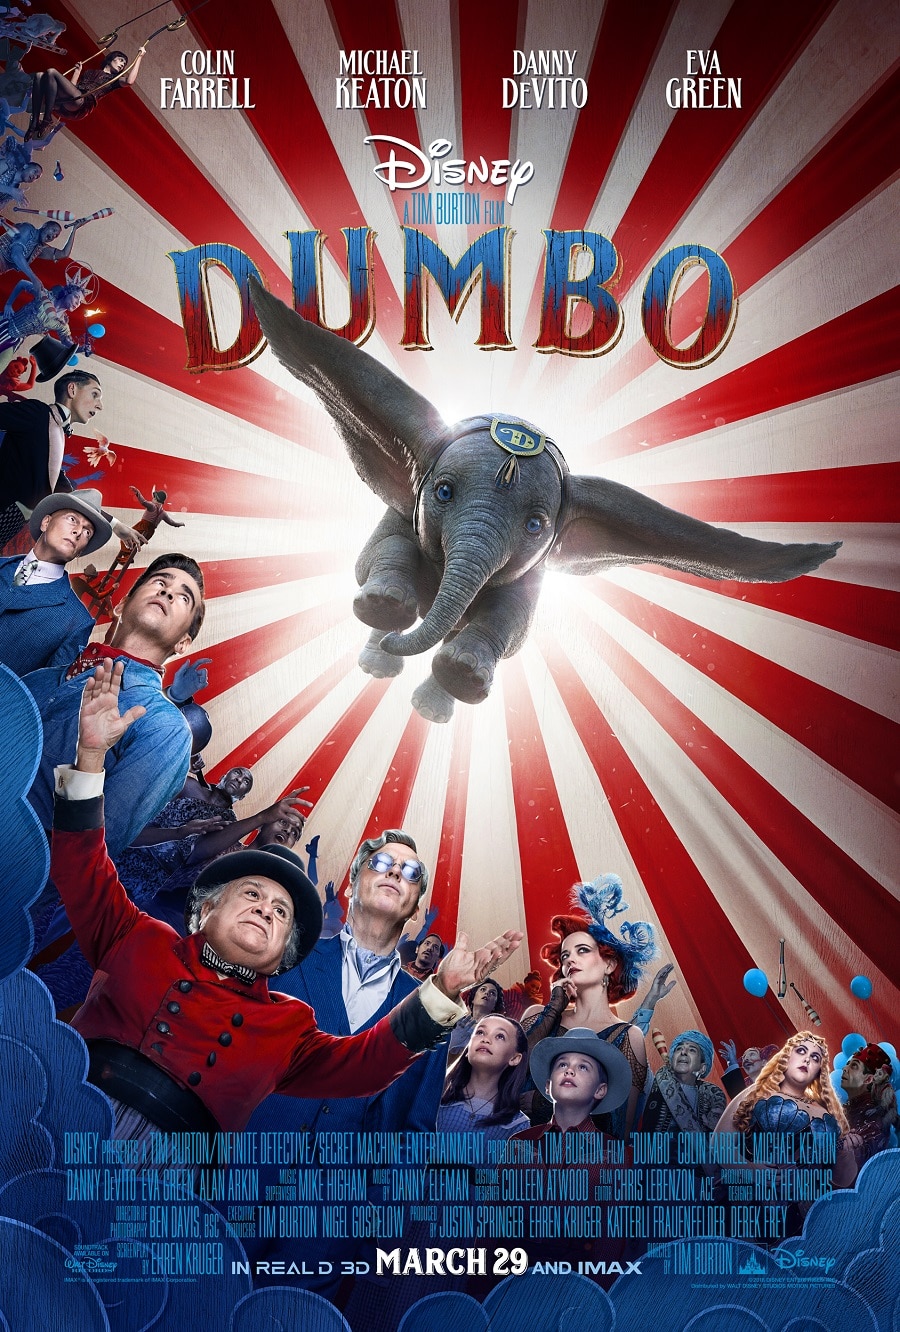 The New Trailer And Poster For Disney's Live-Action Dumbo Are Here!